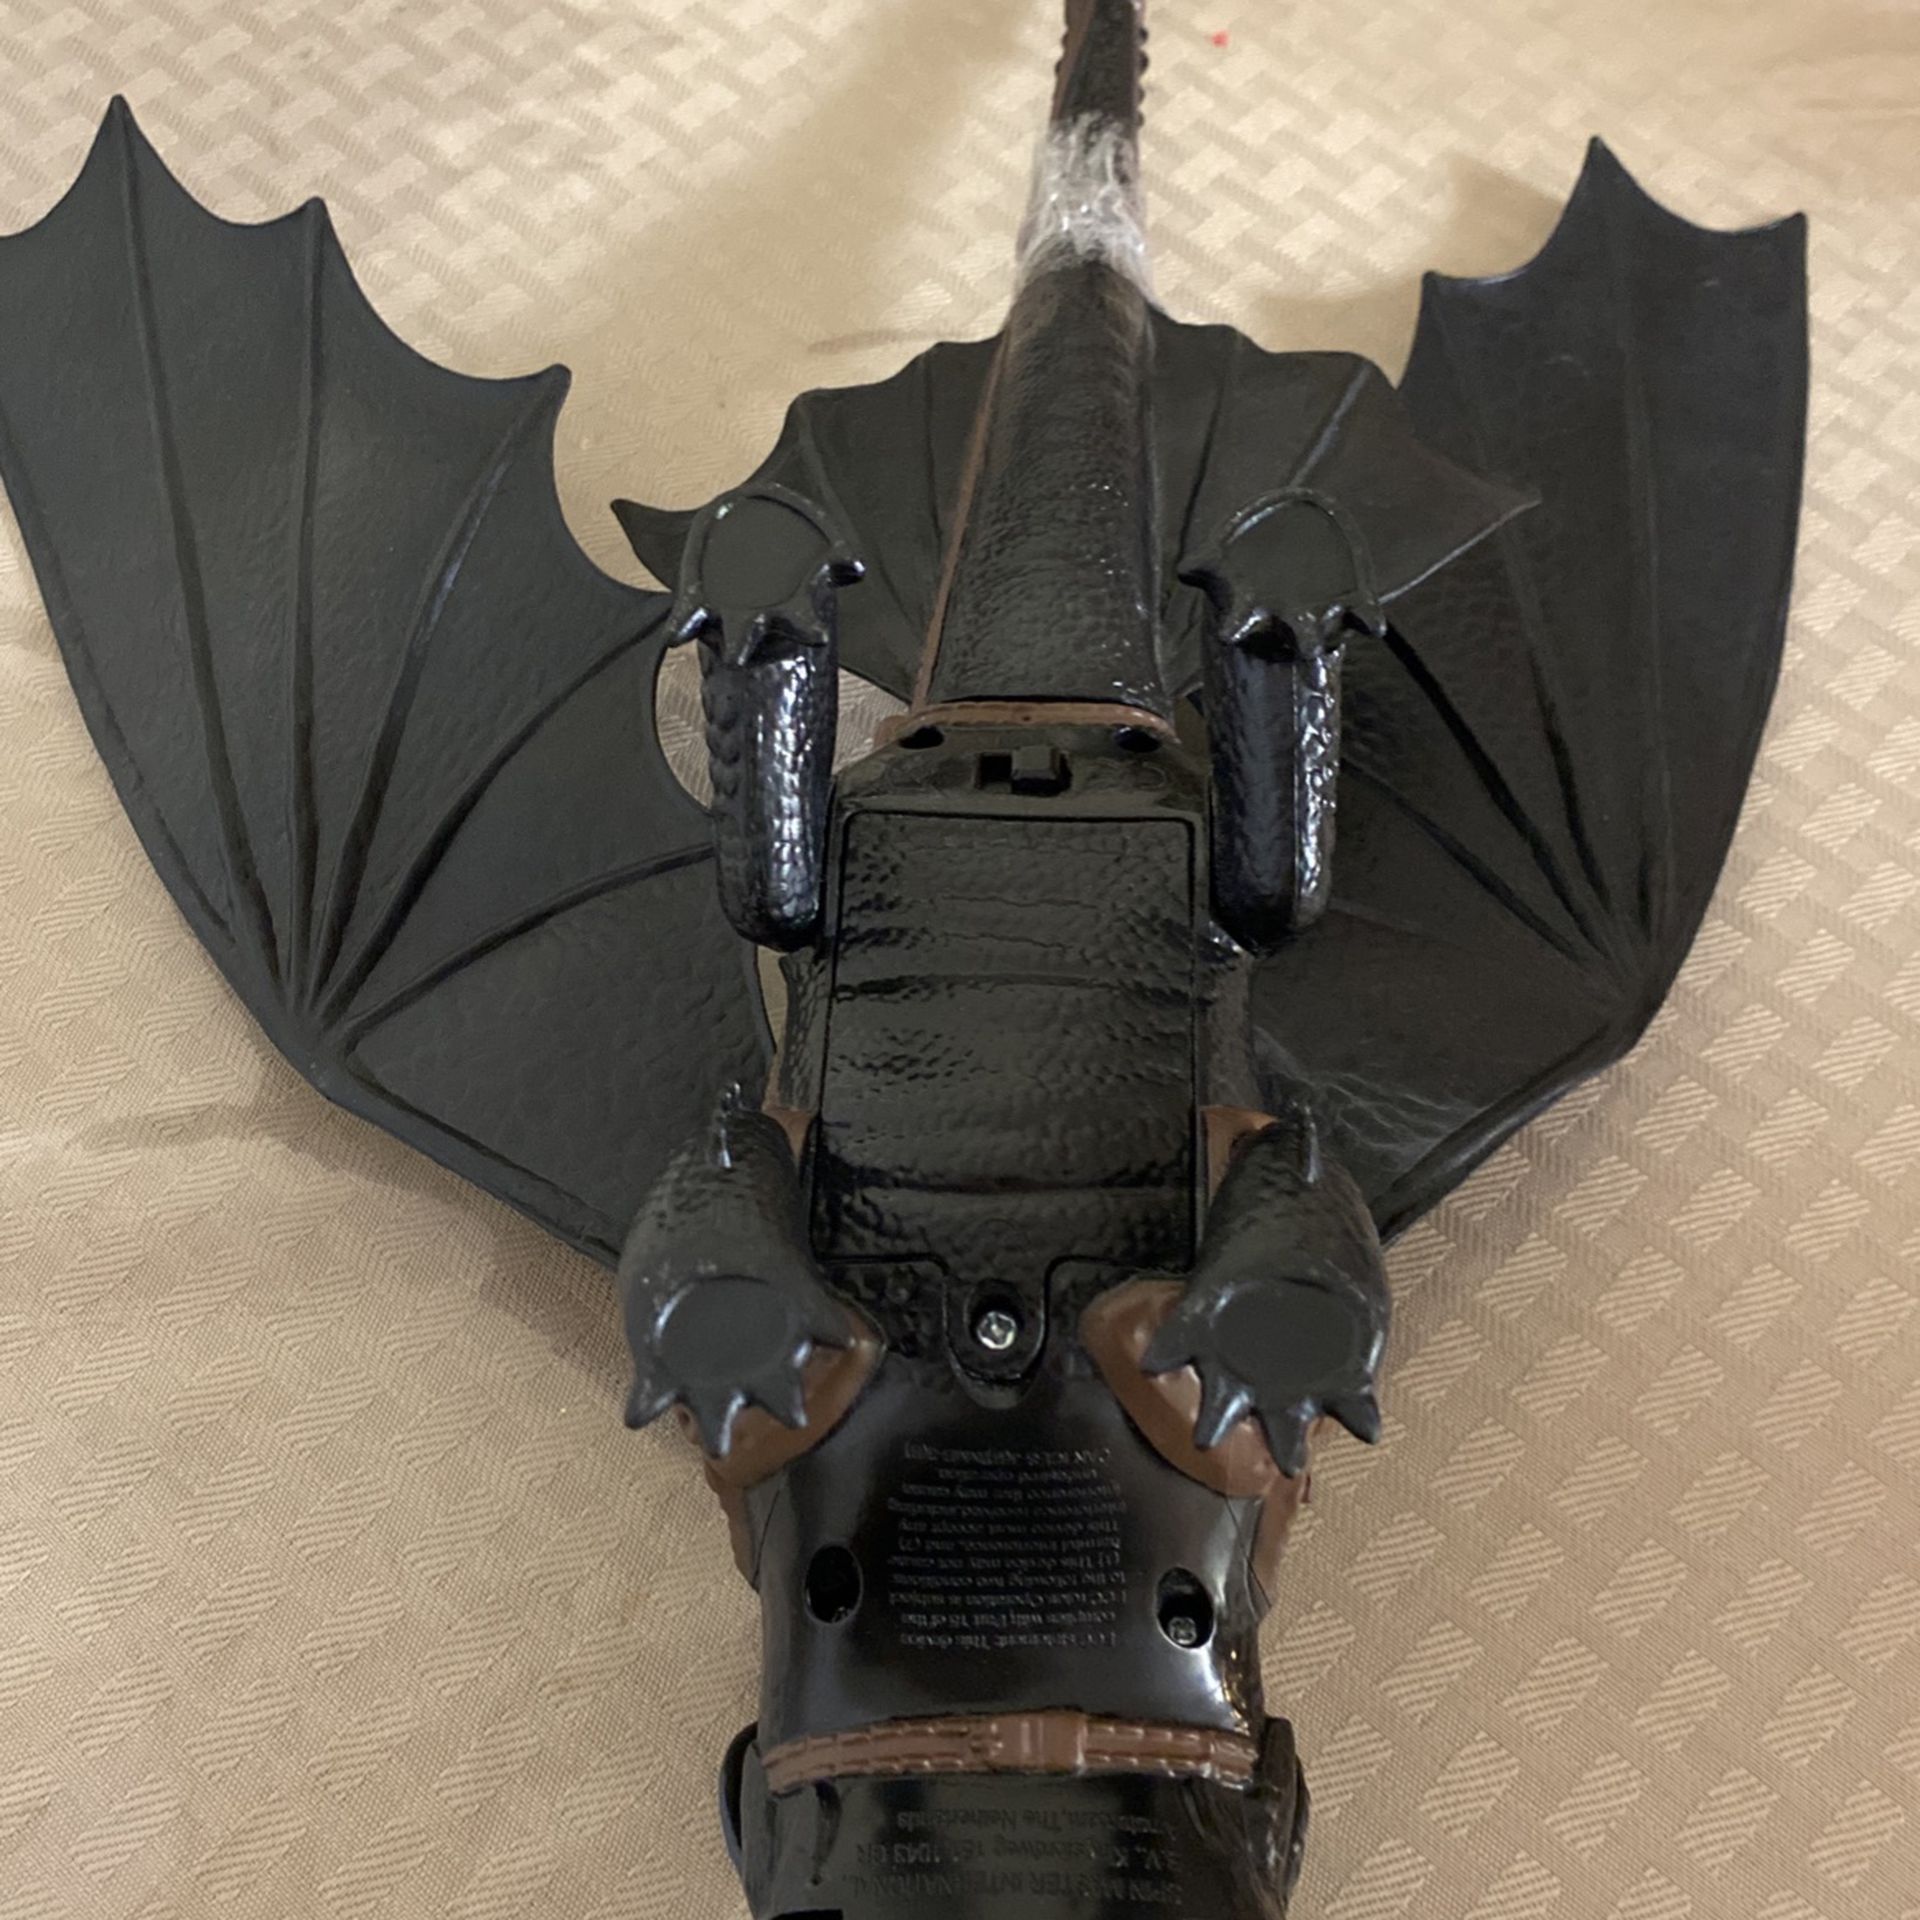 Giant Fire Breathing Toothless Action Figure 20”